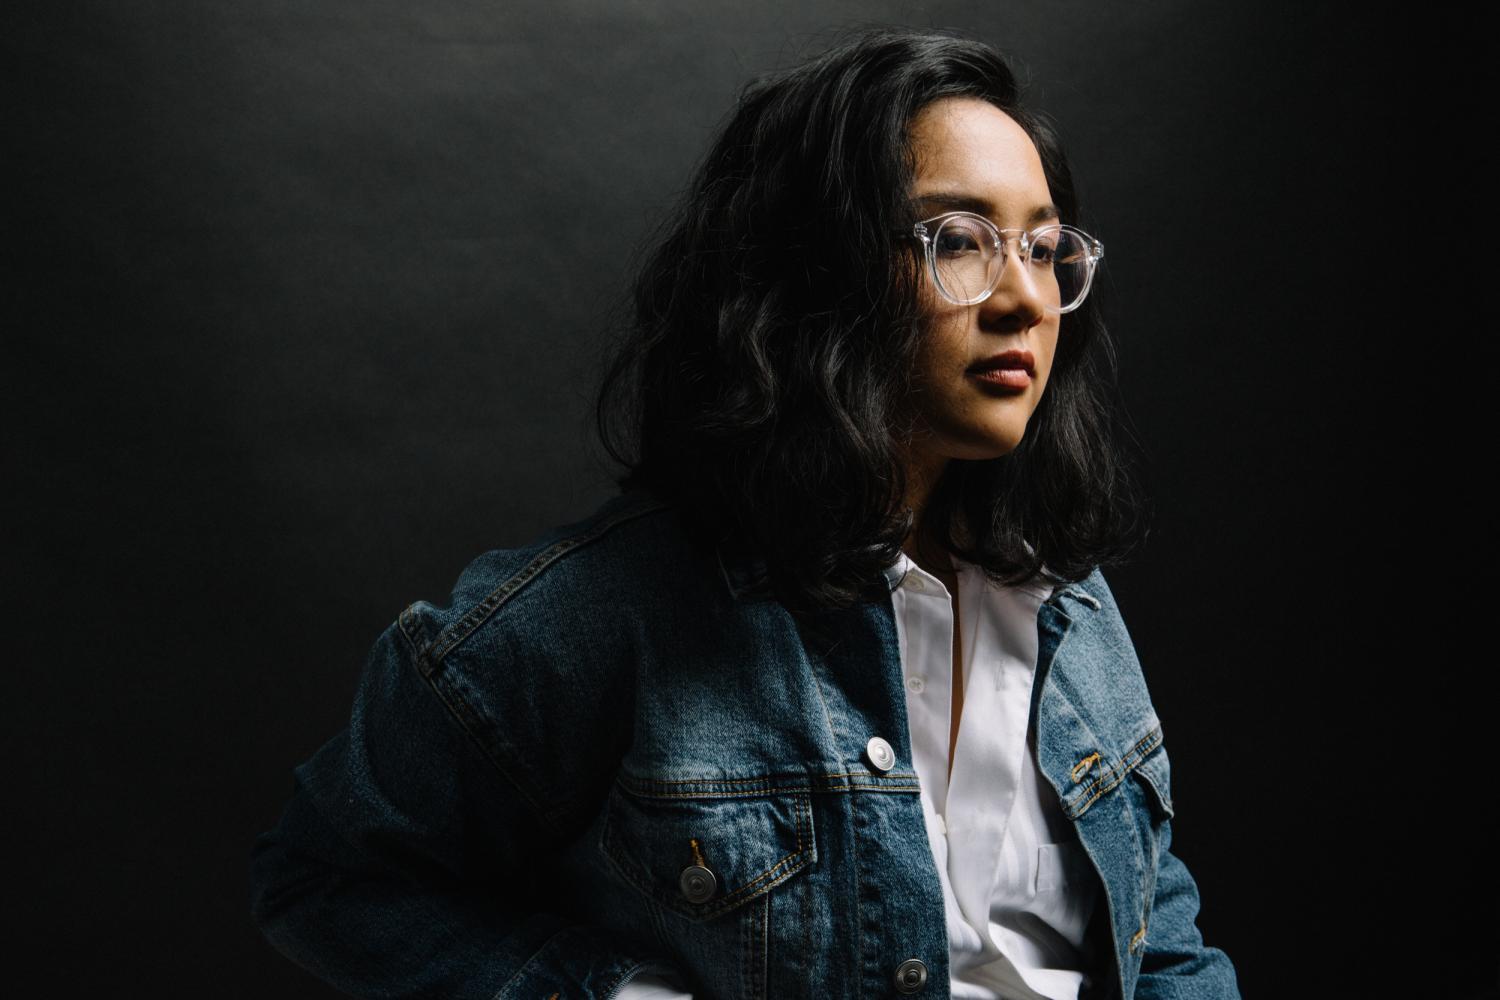 Jay Som writes about her struggles and hardships in her new album Everybody Works